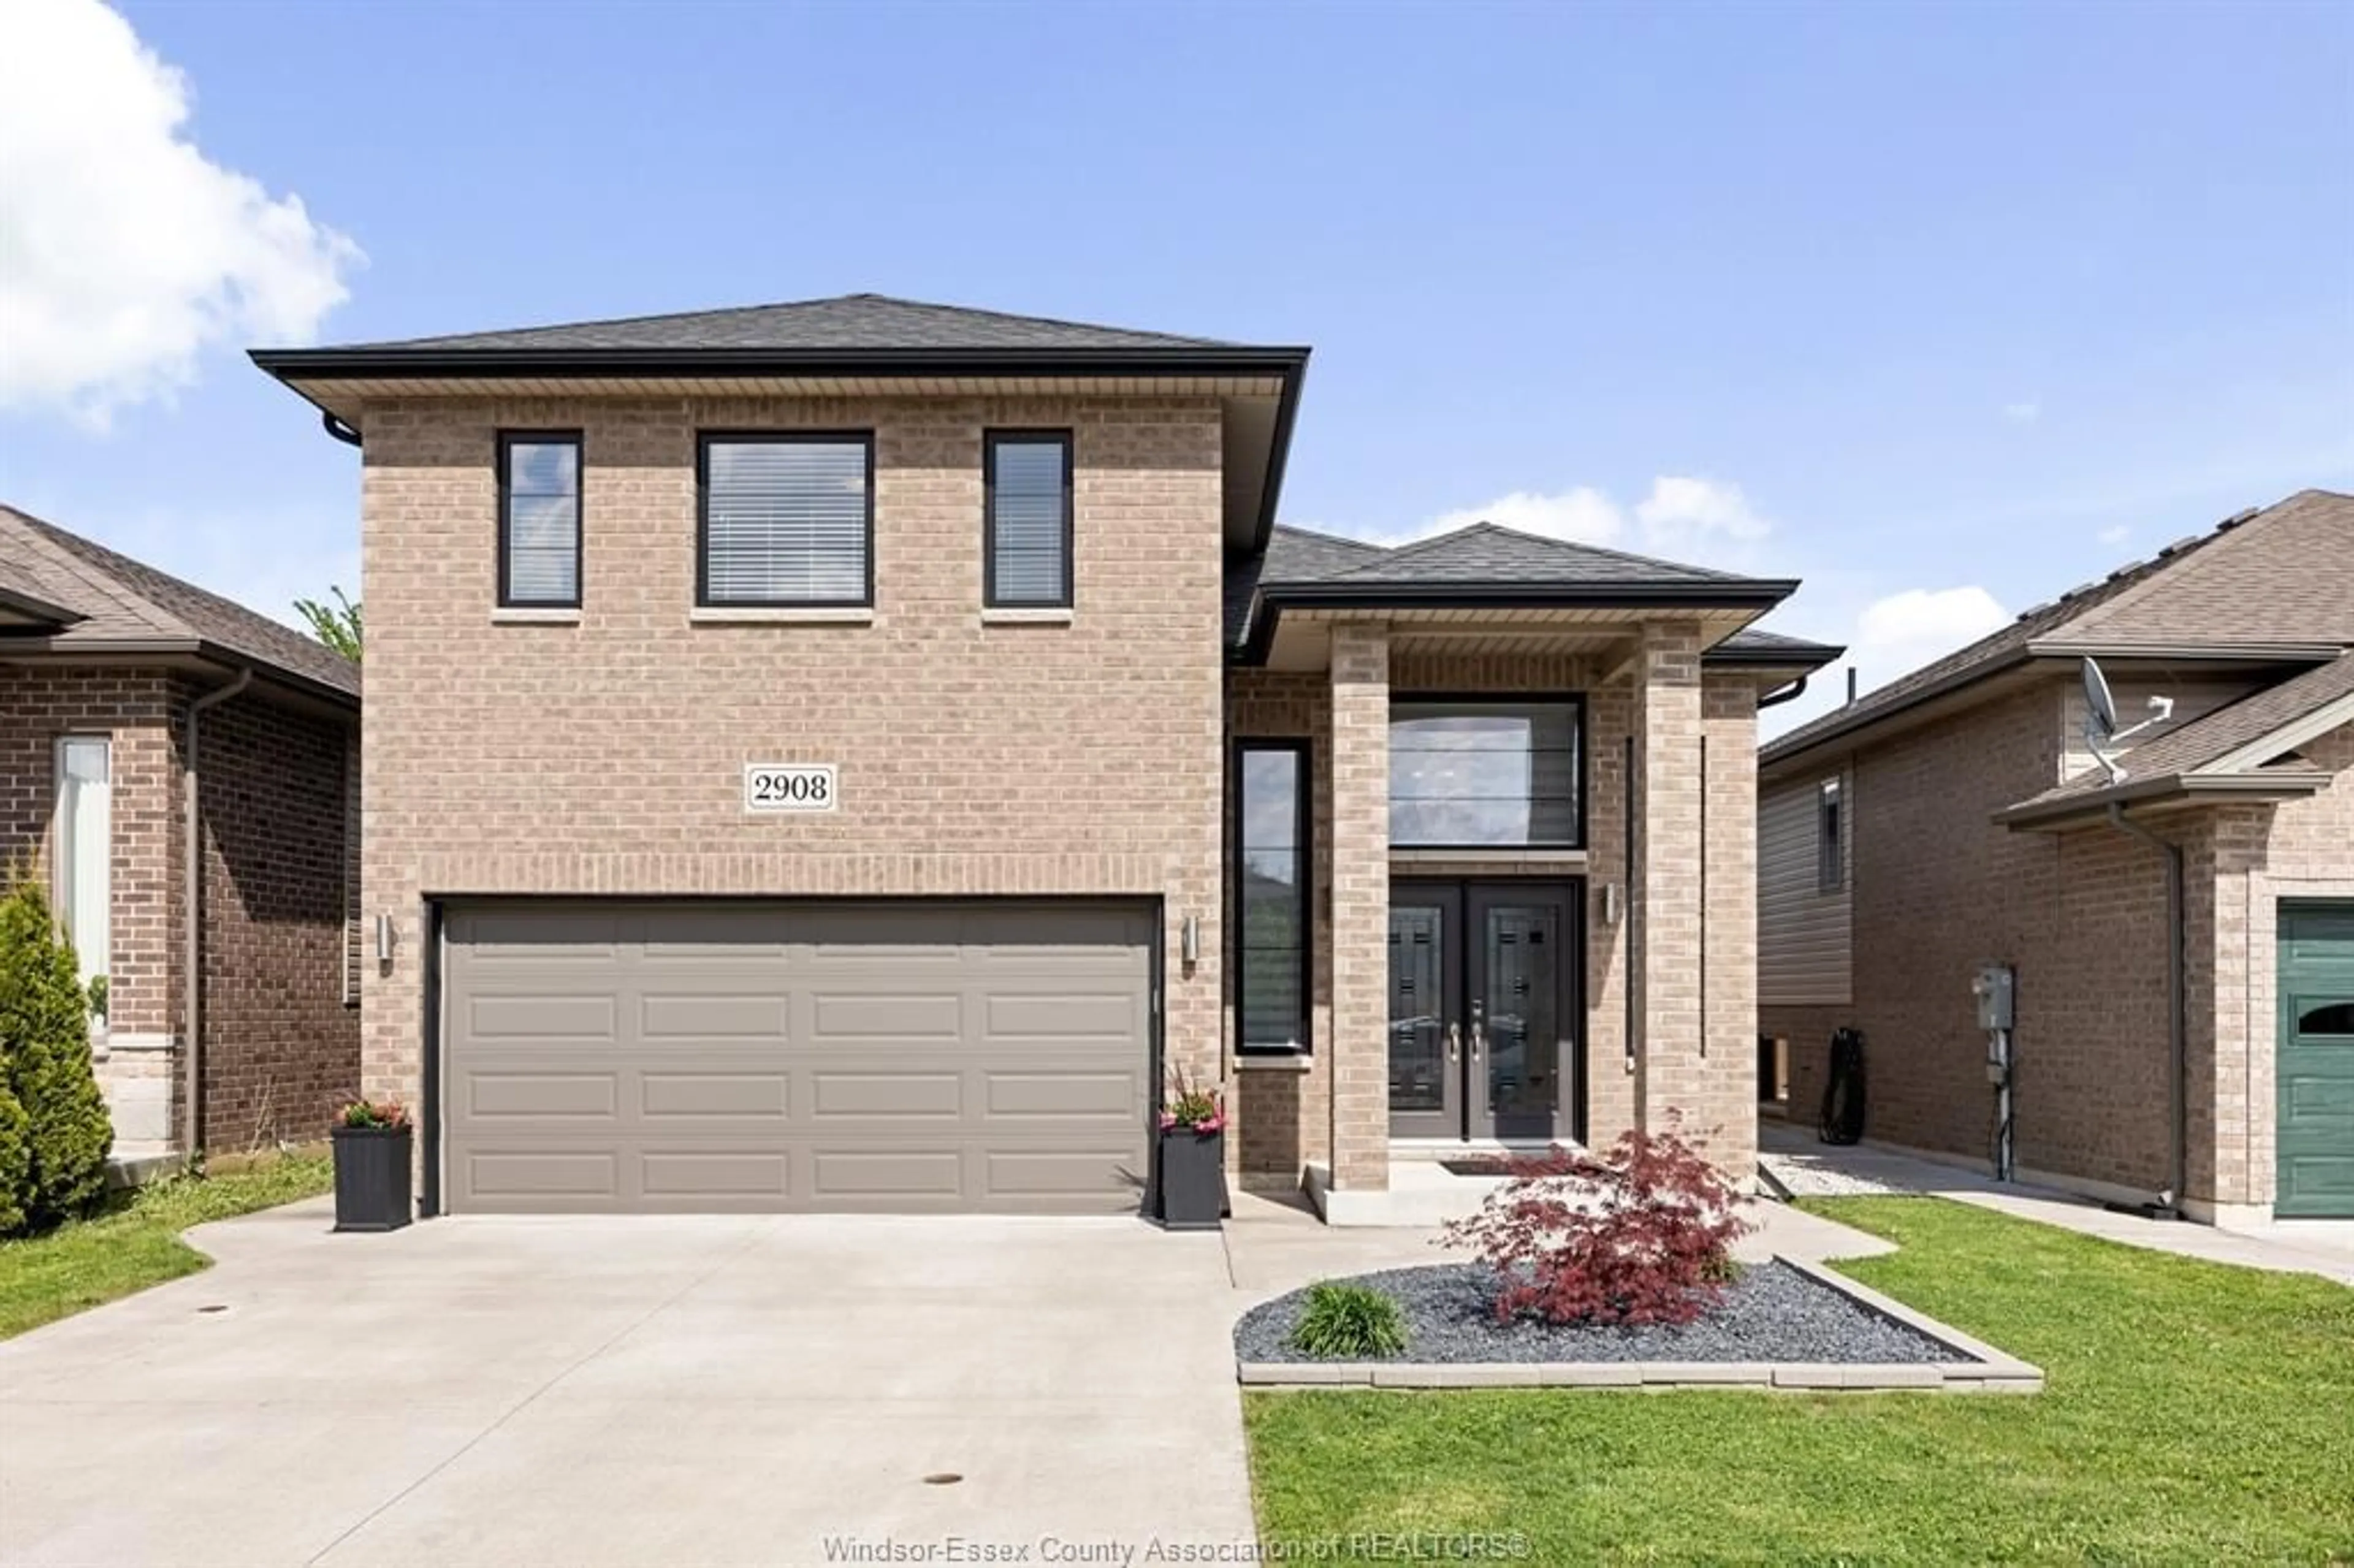 Home with brick exterior material for 2908 MCROBBIE, Windsor Ontario N8R 0A7